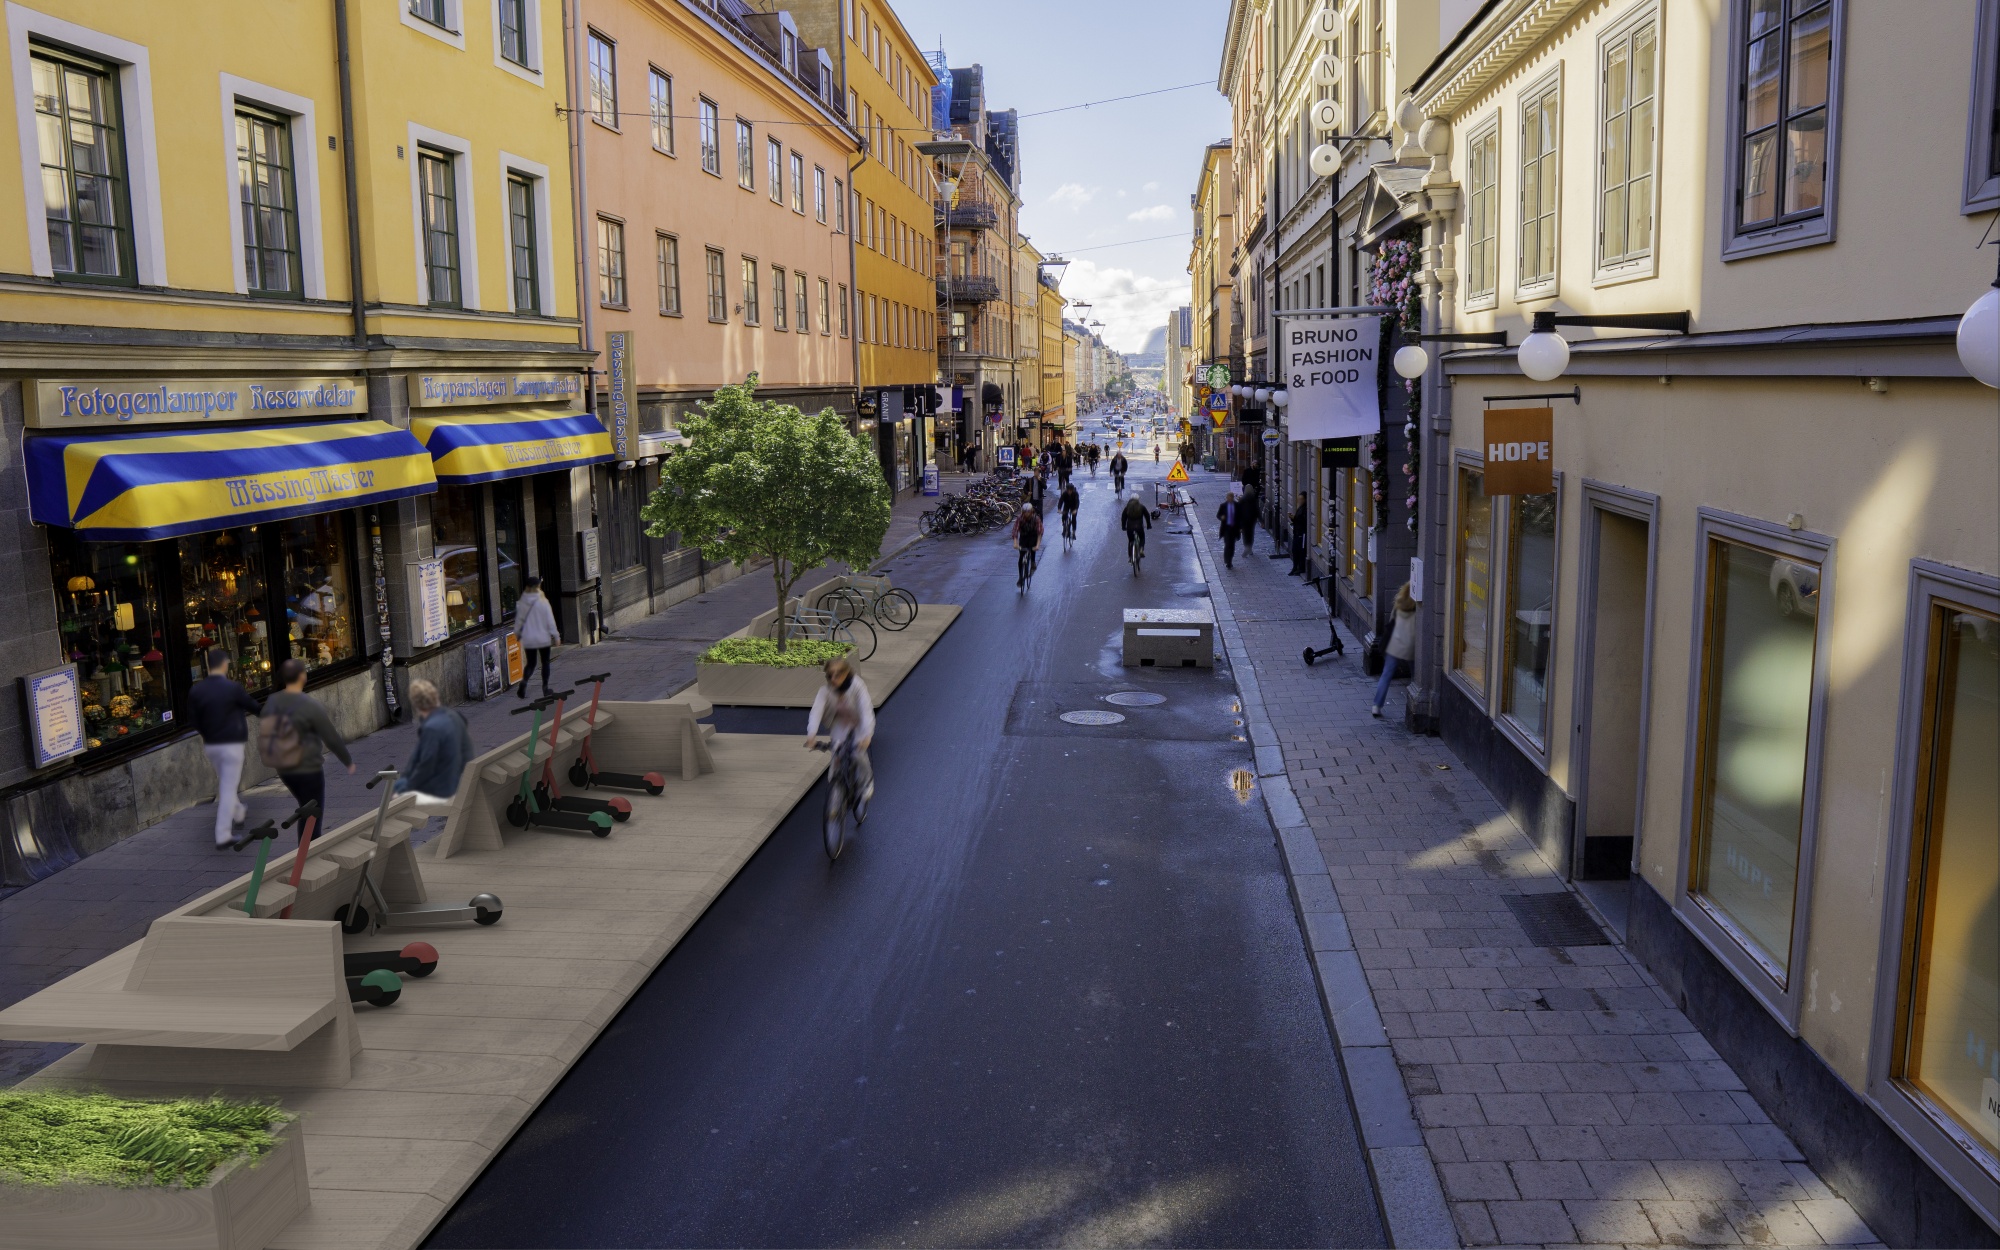 Sweden’s Street Moves project aims to introduce&nbsp;adaptable curb elements like this scooter-parking and seating unit to every street in the nation by 2030.&nbsp;